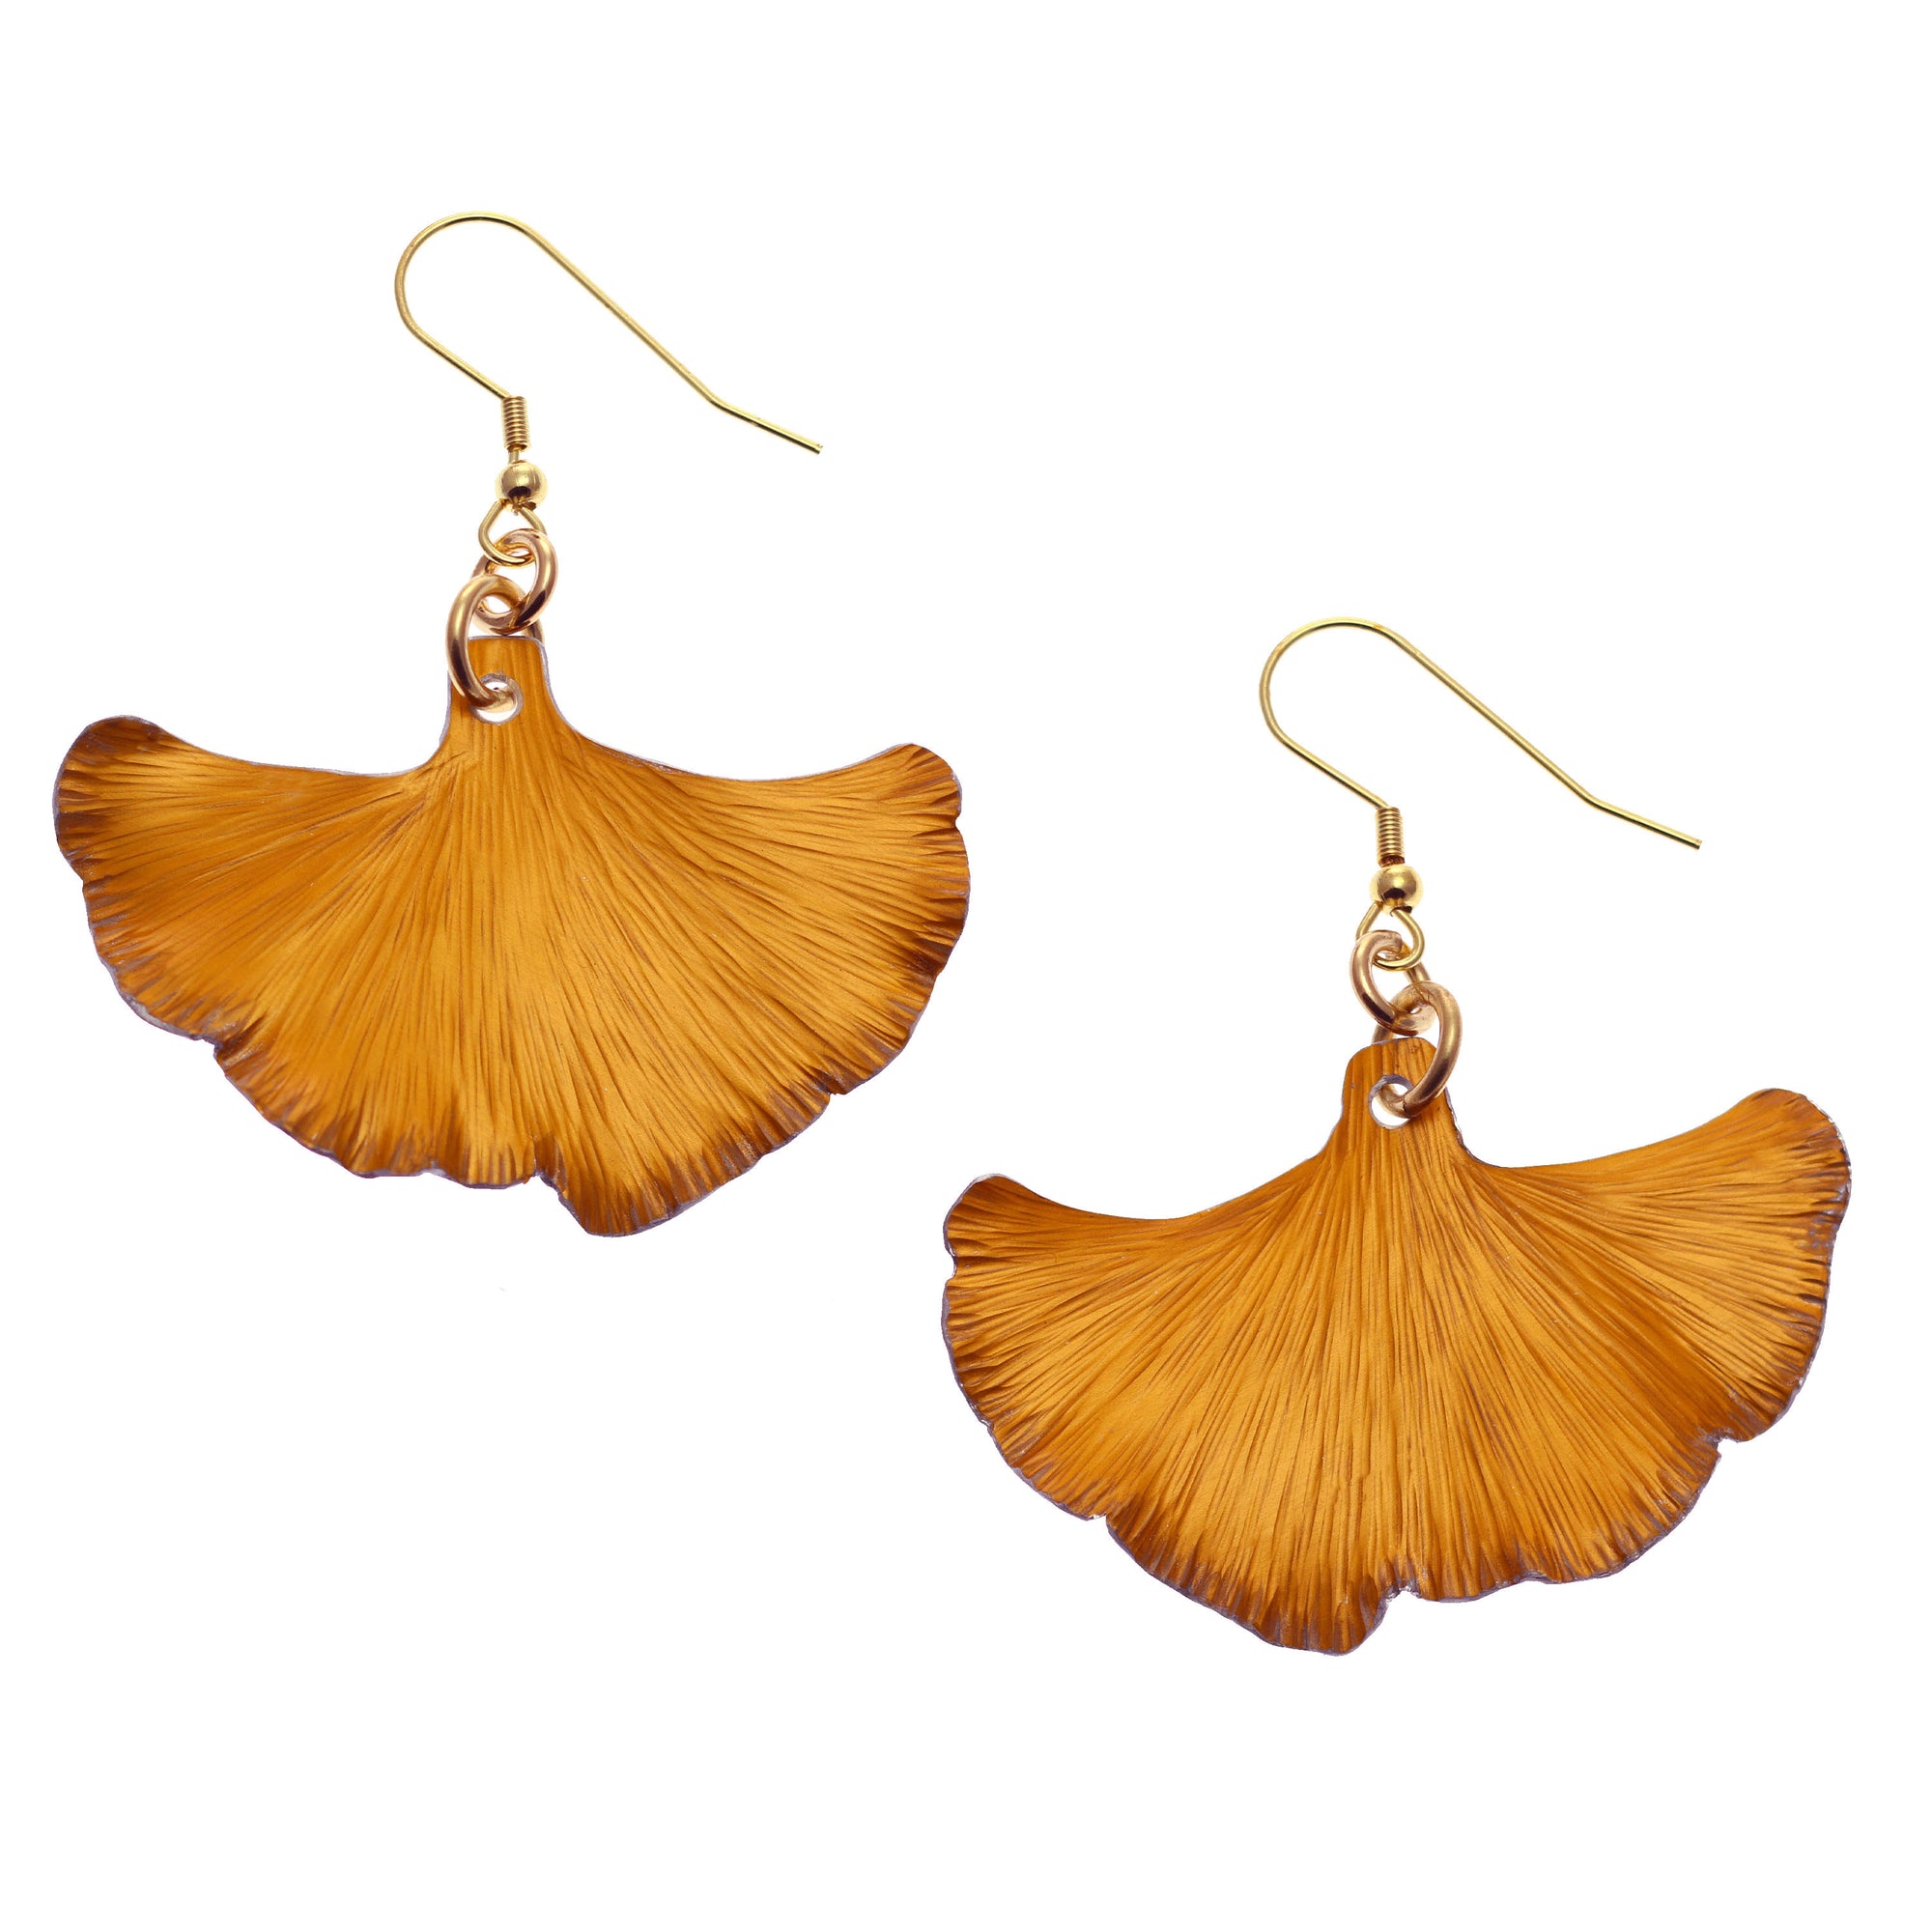 Orange Anodized Aluminum Ginkgo Earrings, showcasing intricate leaf-shaped design, adding elegance to any outfit.